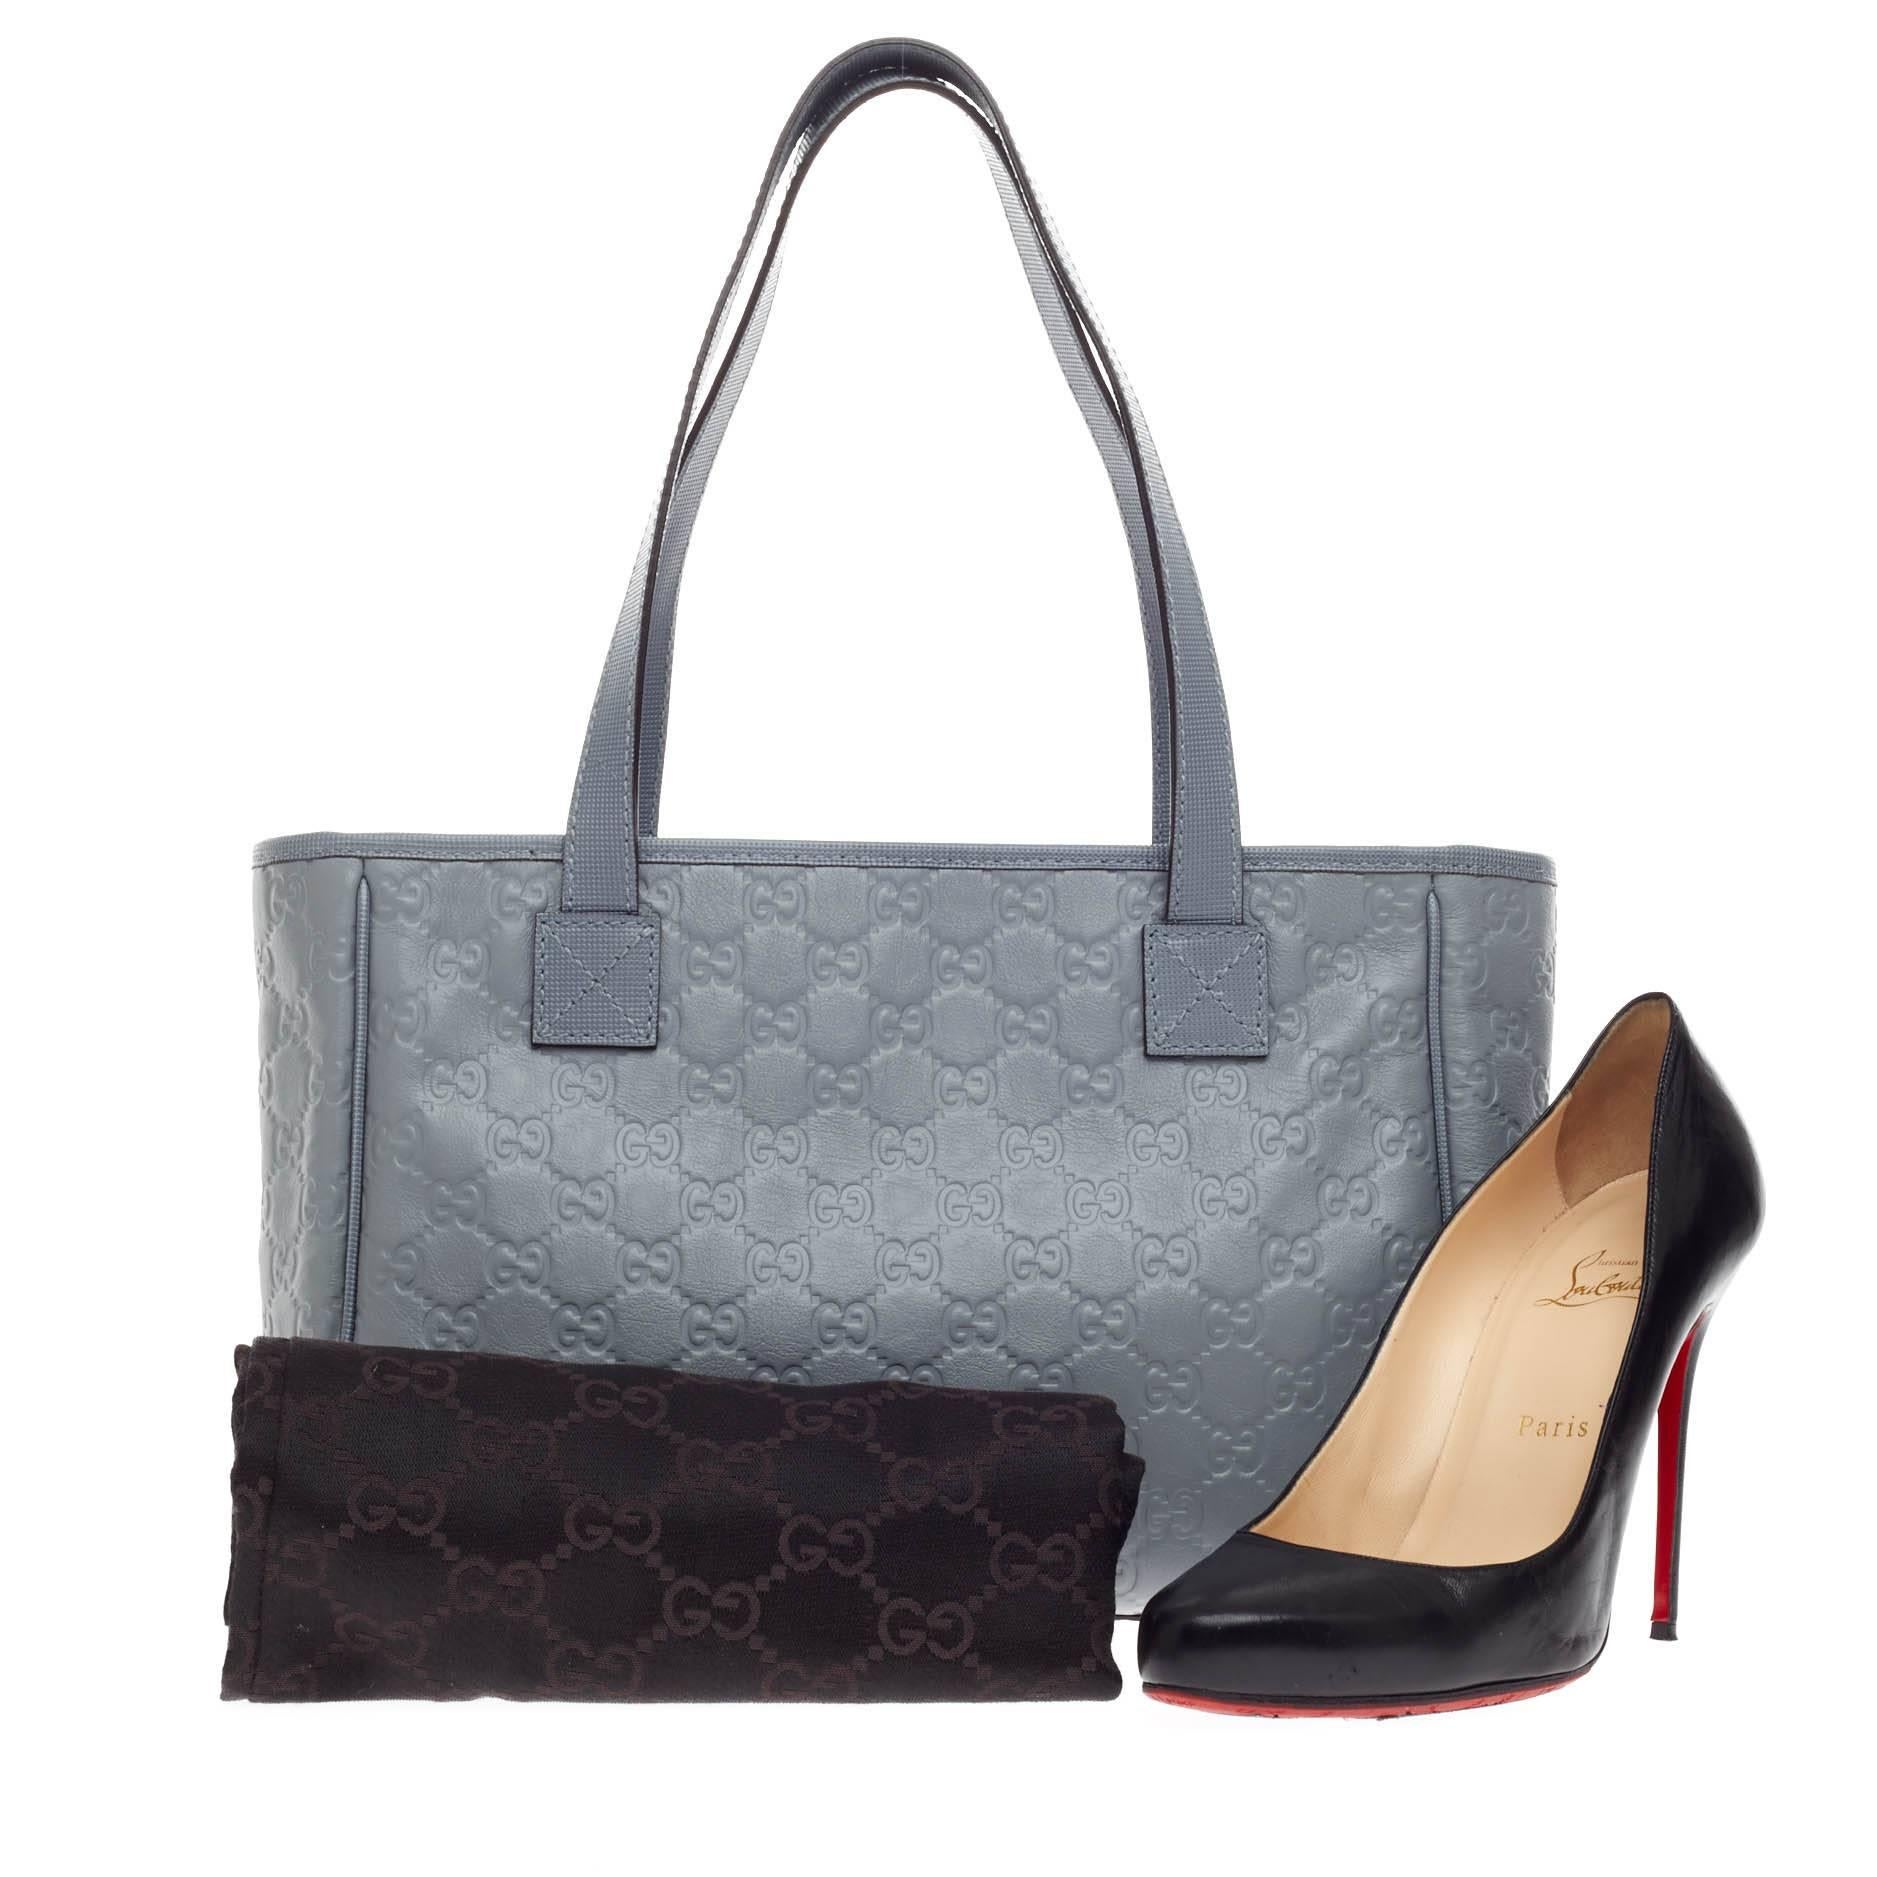 This authentic Gucci Slit Pocket Tote Guccisima Leather Medium is ideal for everyday use. Crafted in light blue guccisima leather, this simple yet chic features dual-flat leather handles, front pocket, protective base studs and silver-tone hardware